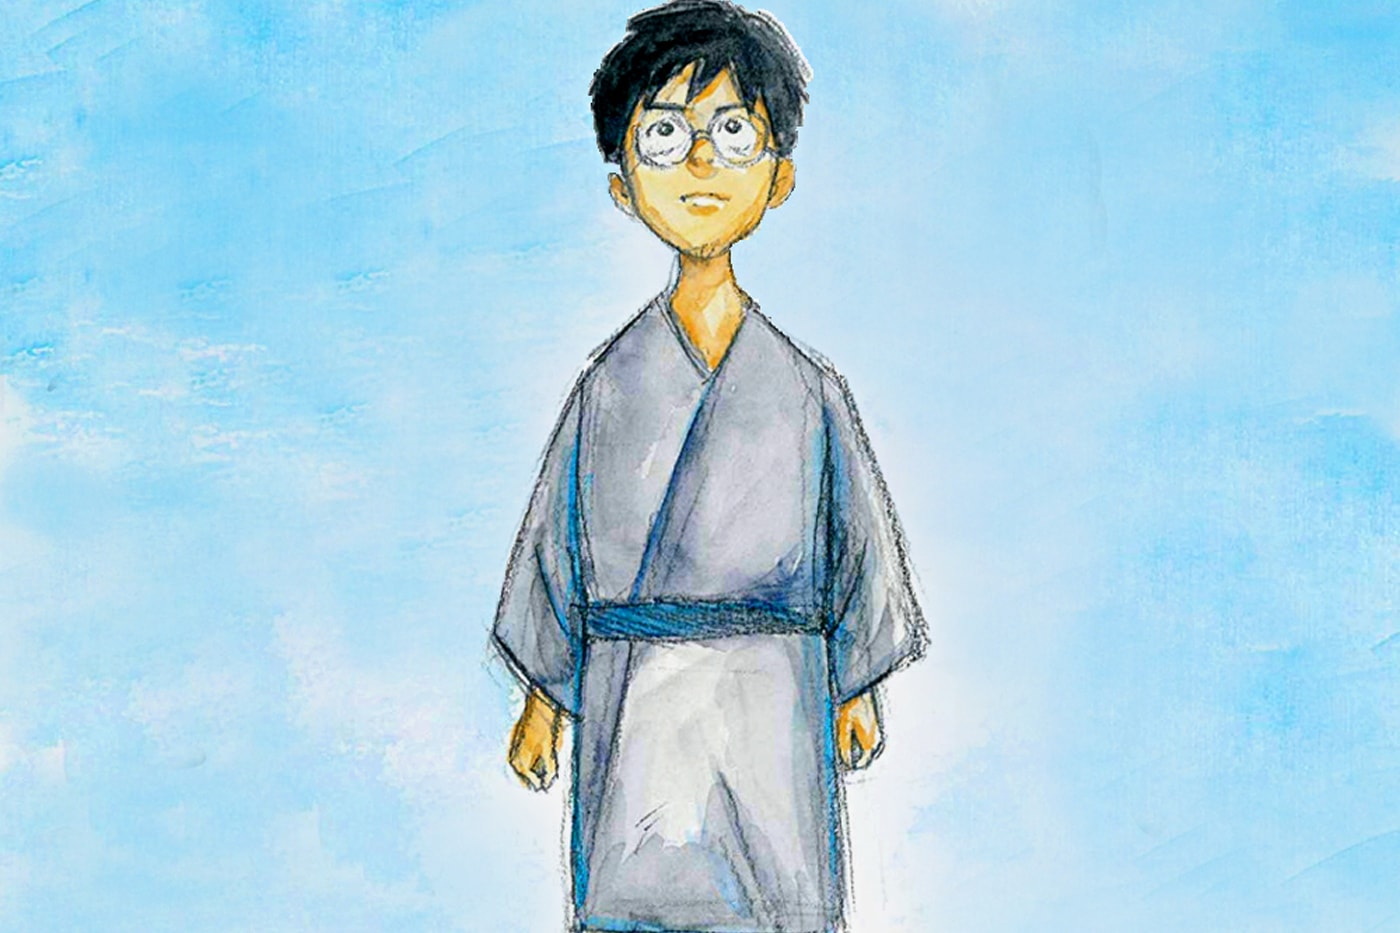 Studio Ghibli Will Not Be Releasing Trailers or Commercials for Hayao Miyazaki's Final Film